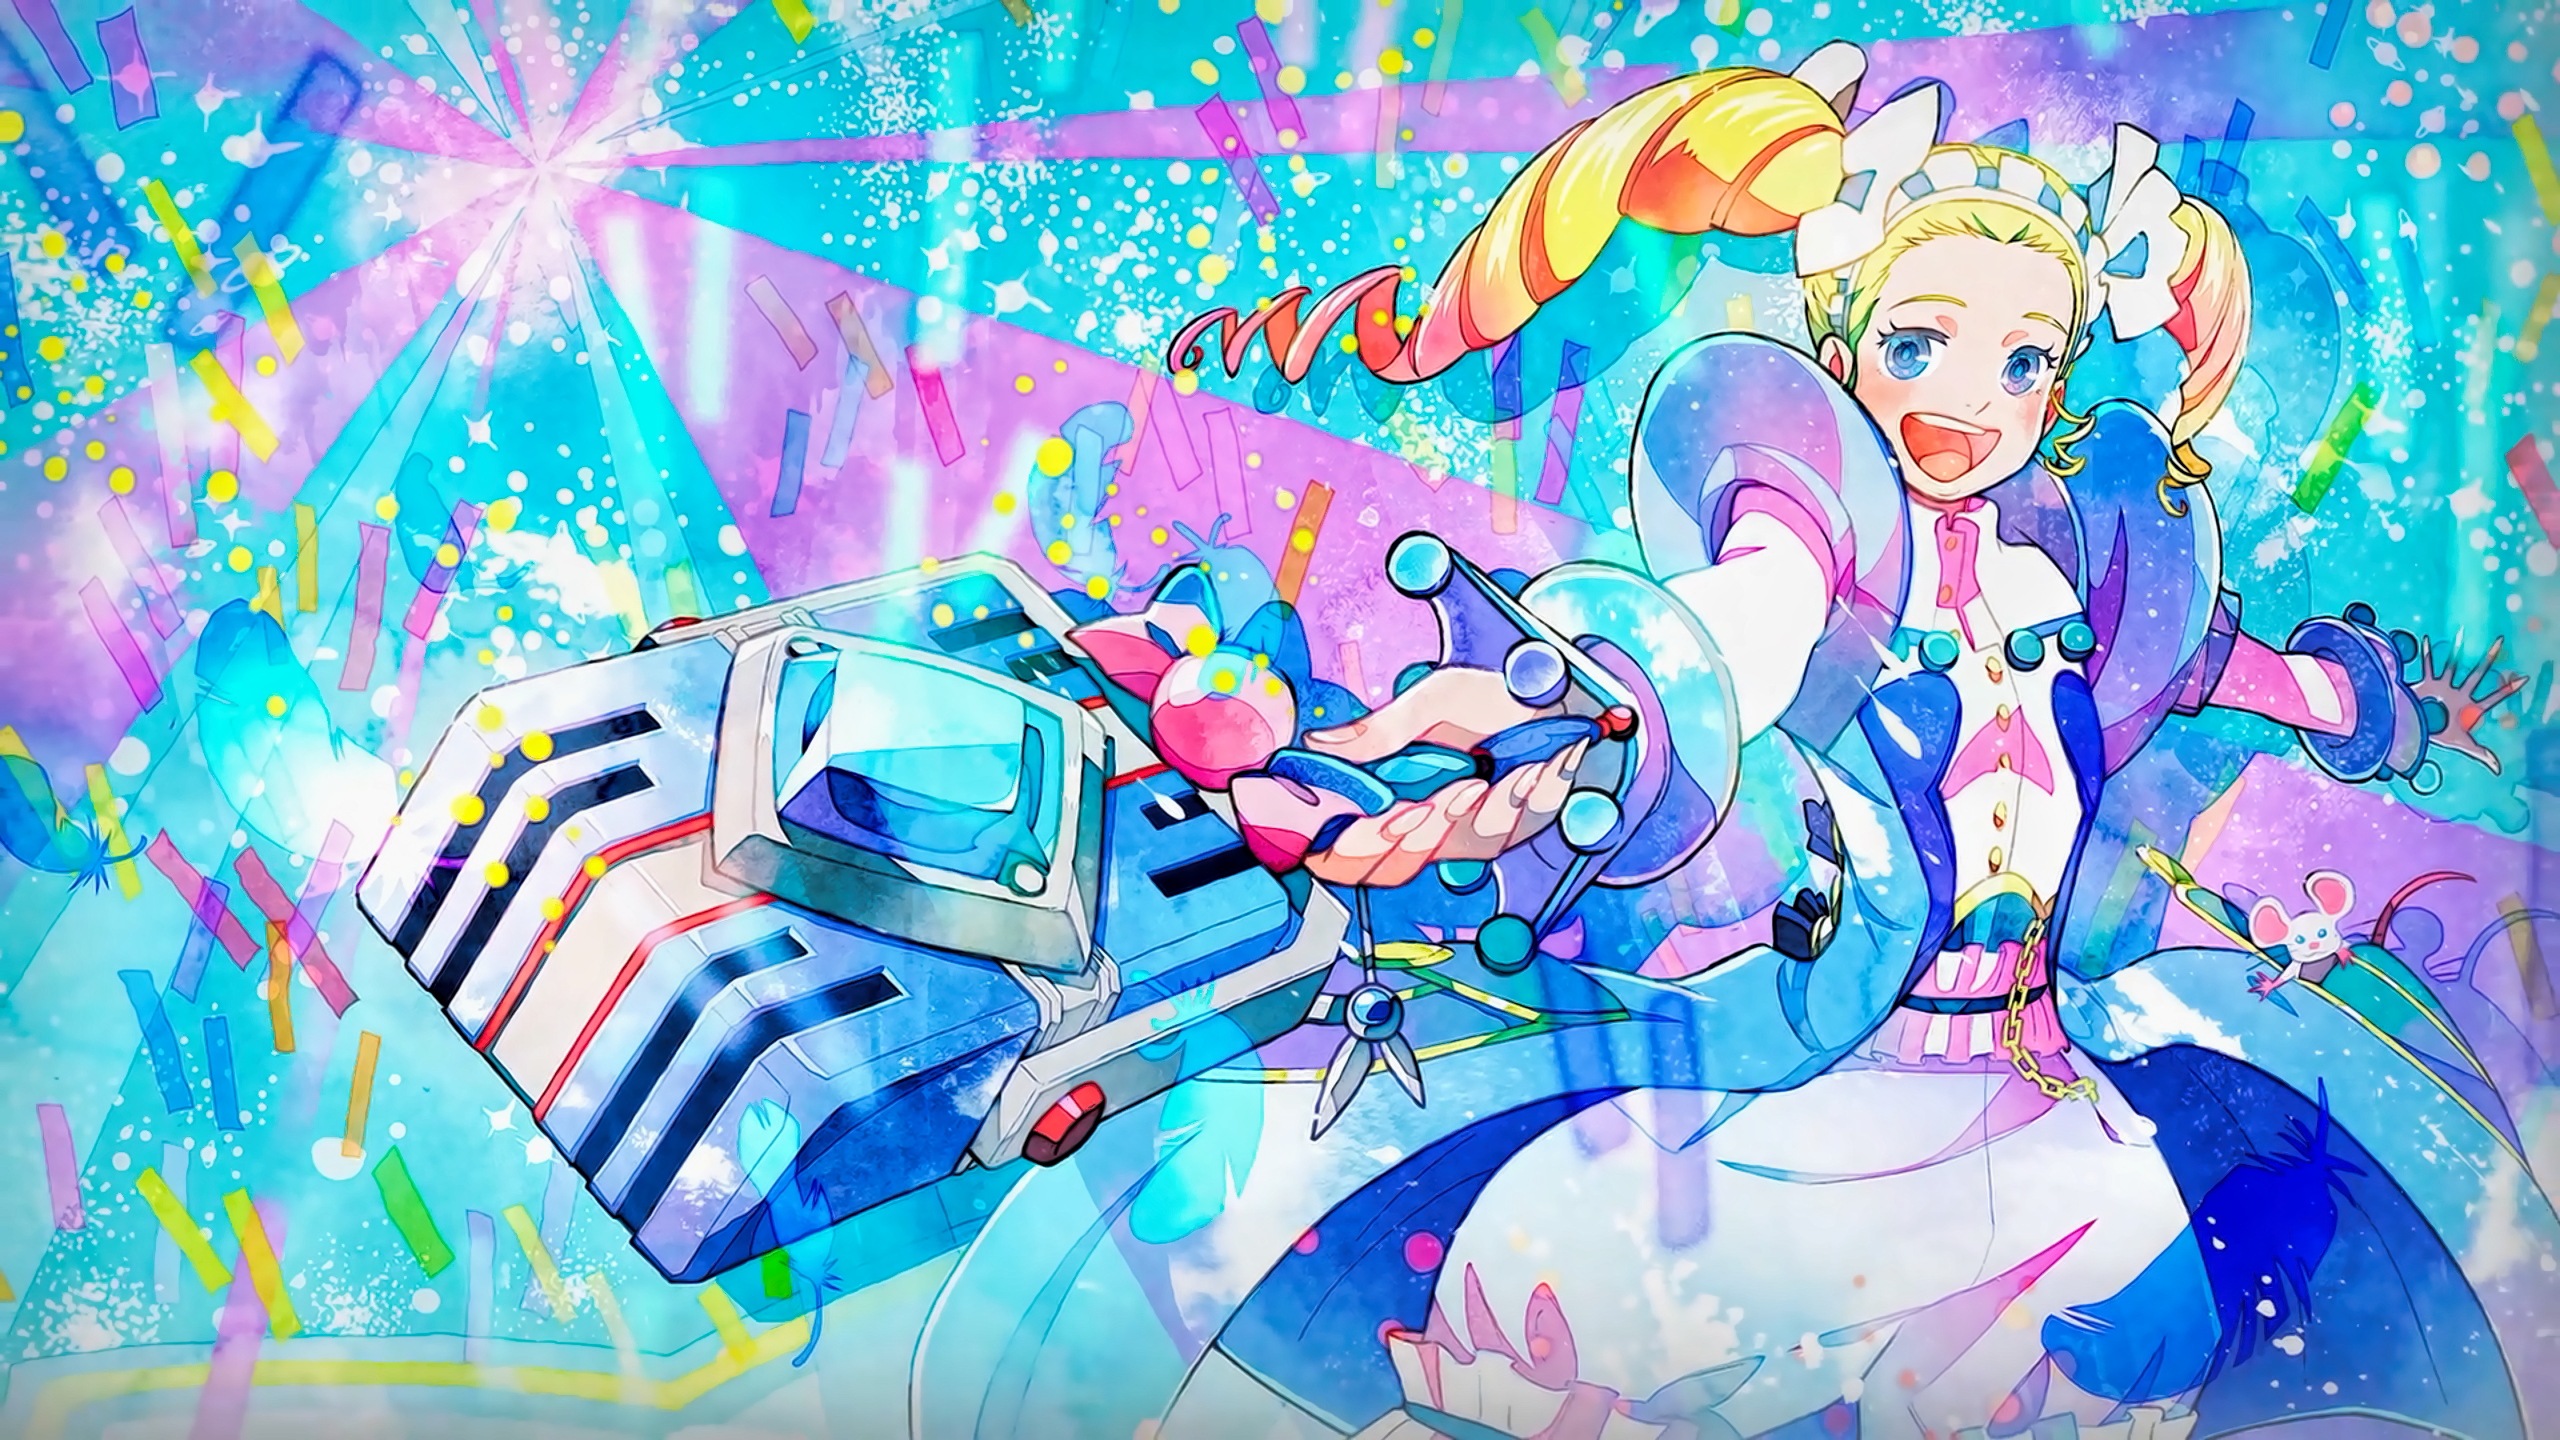 ClassicaLoid Musician Anime Girls Open Mouth Blonde Blue Eyes Anime Cyan Bright Colorful 2560x1440